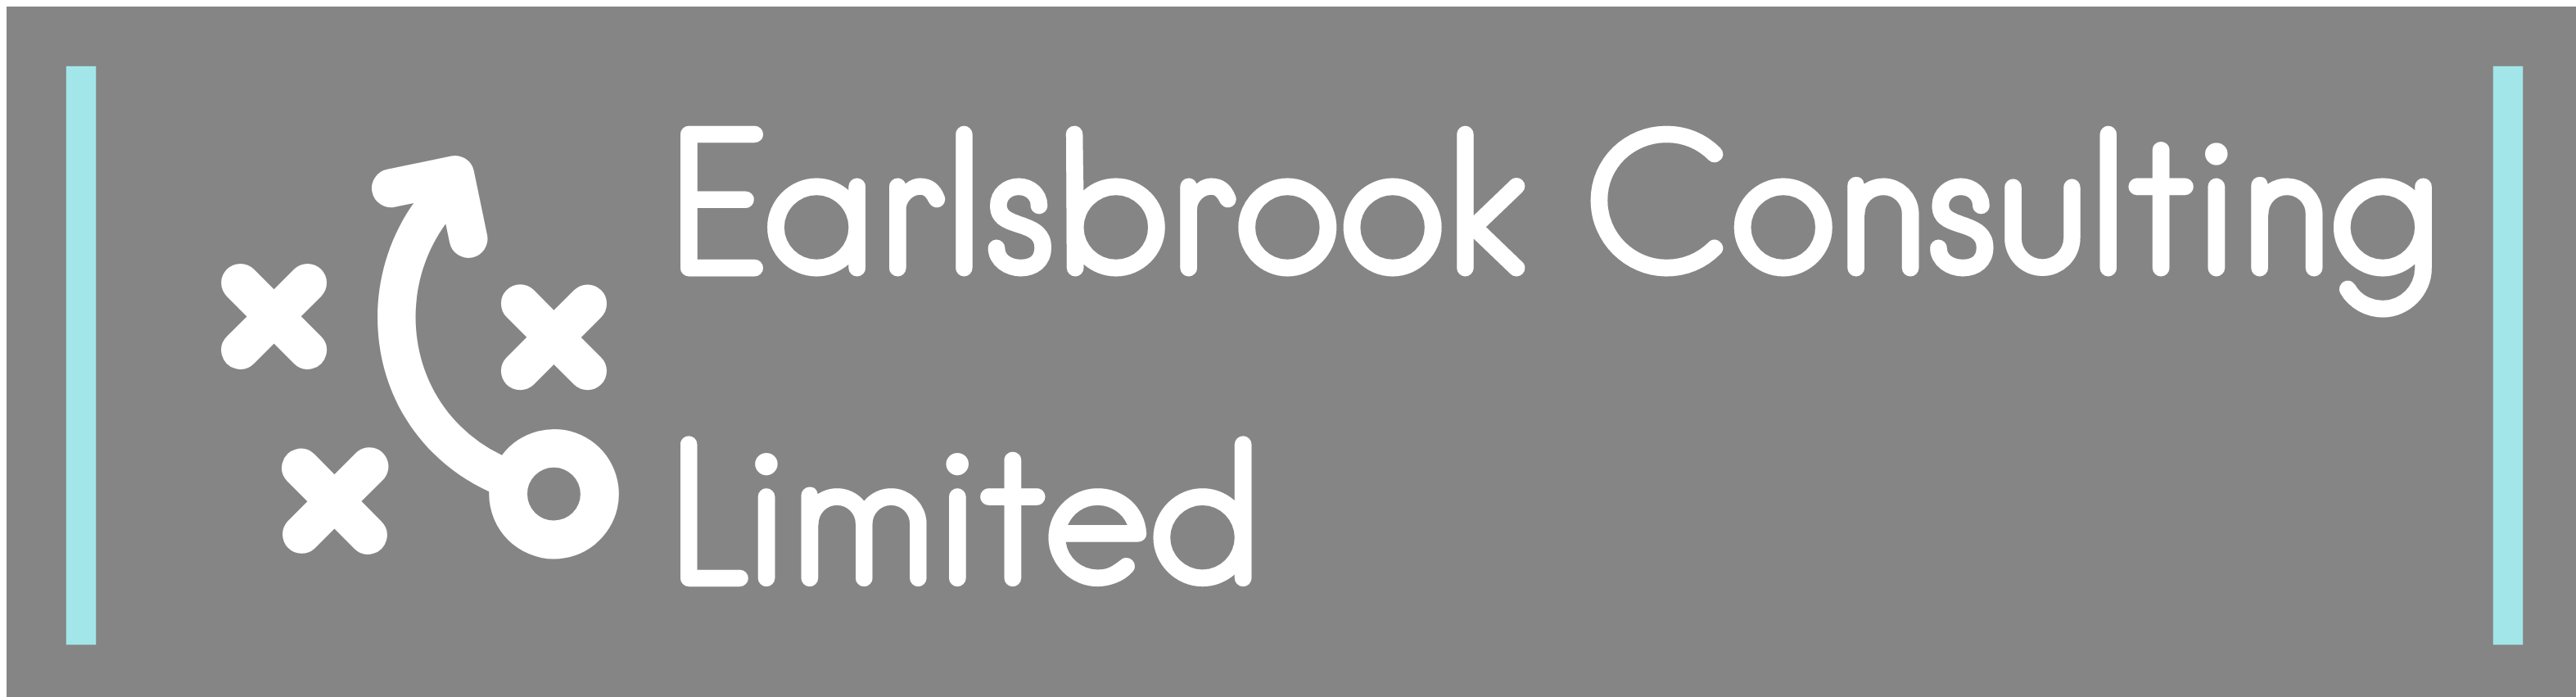 Earlsbrook Consulting Limited